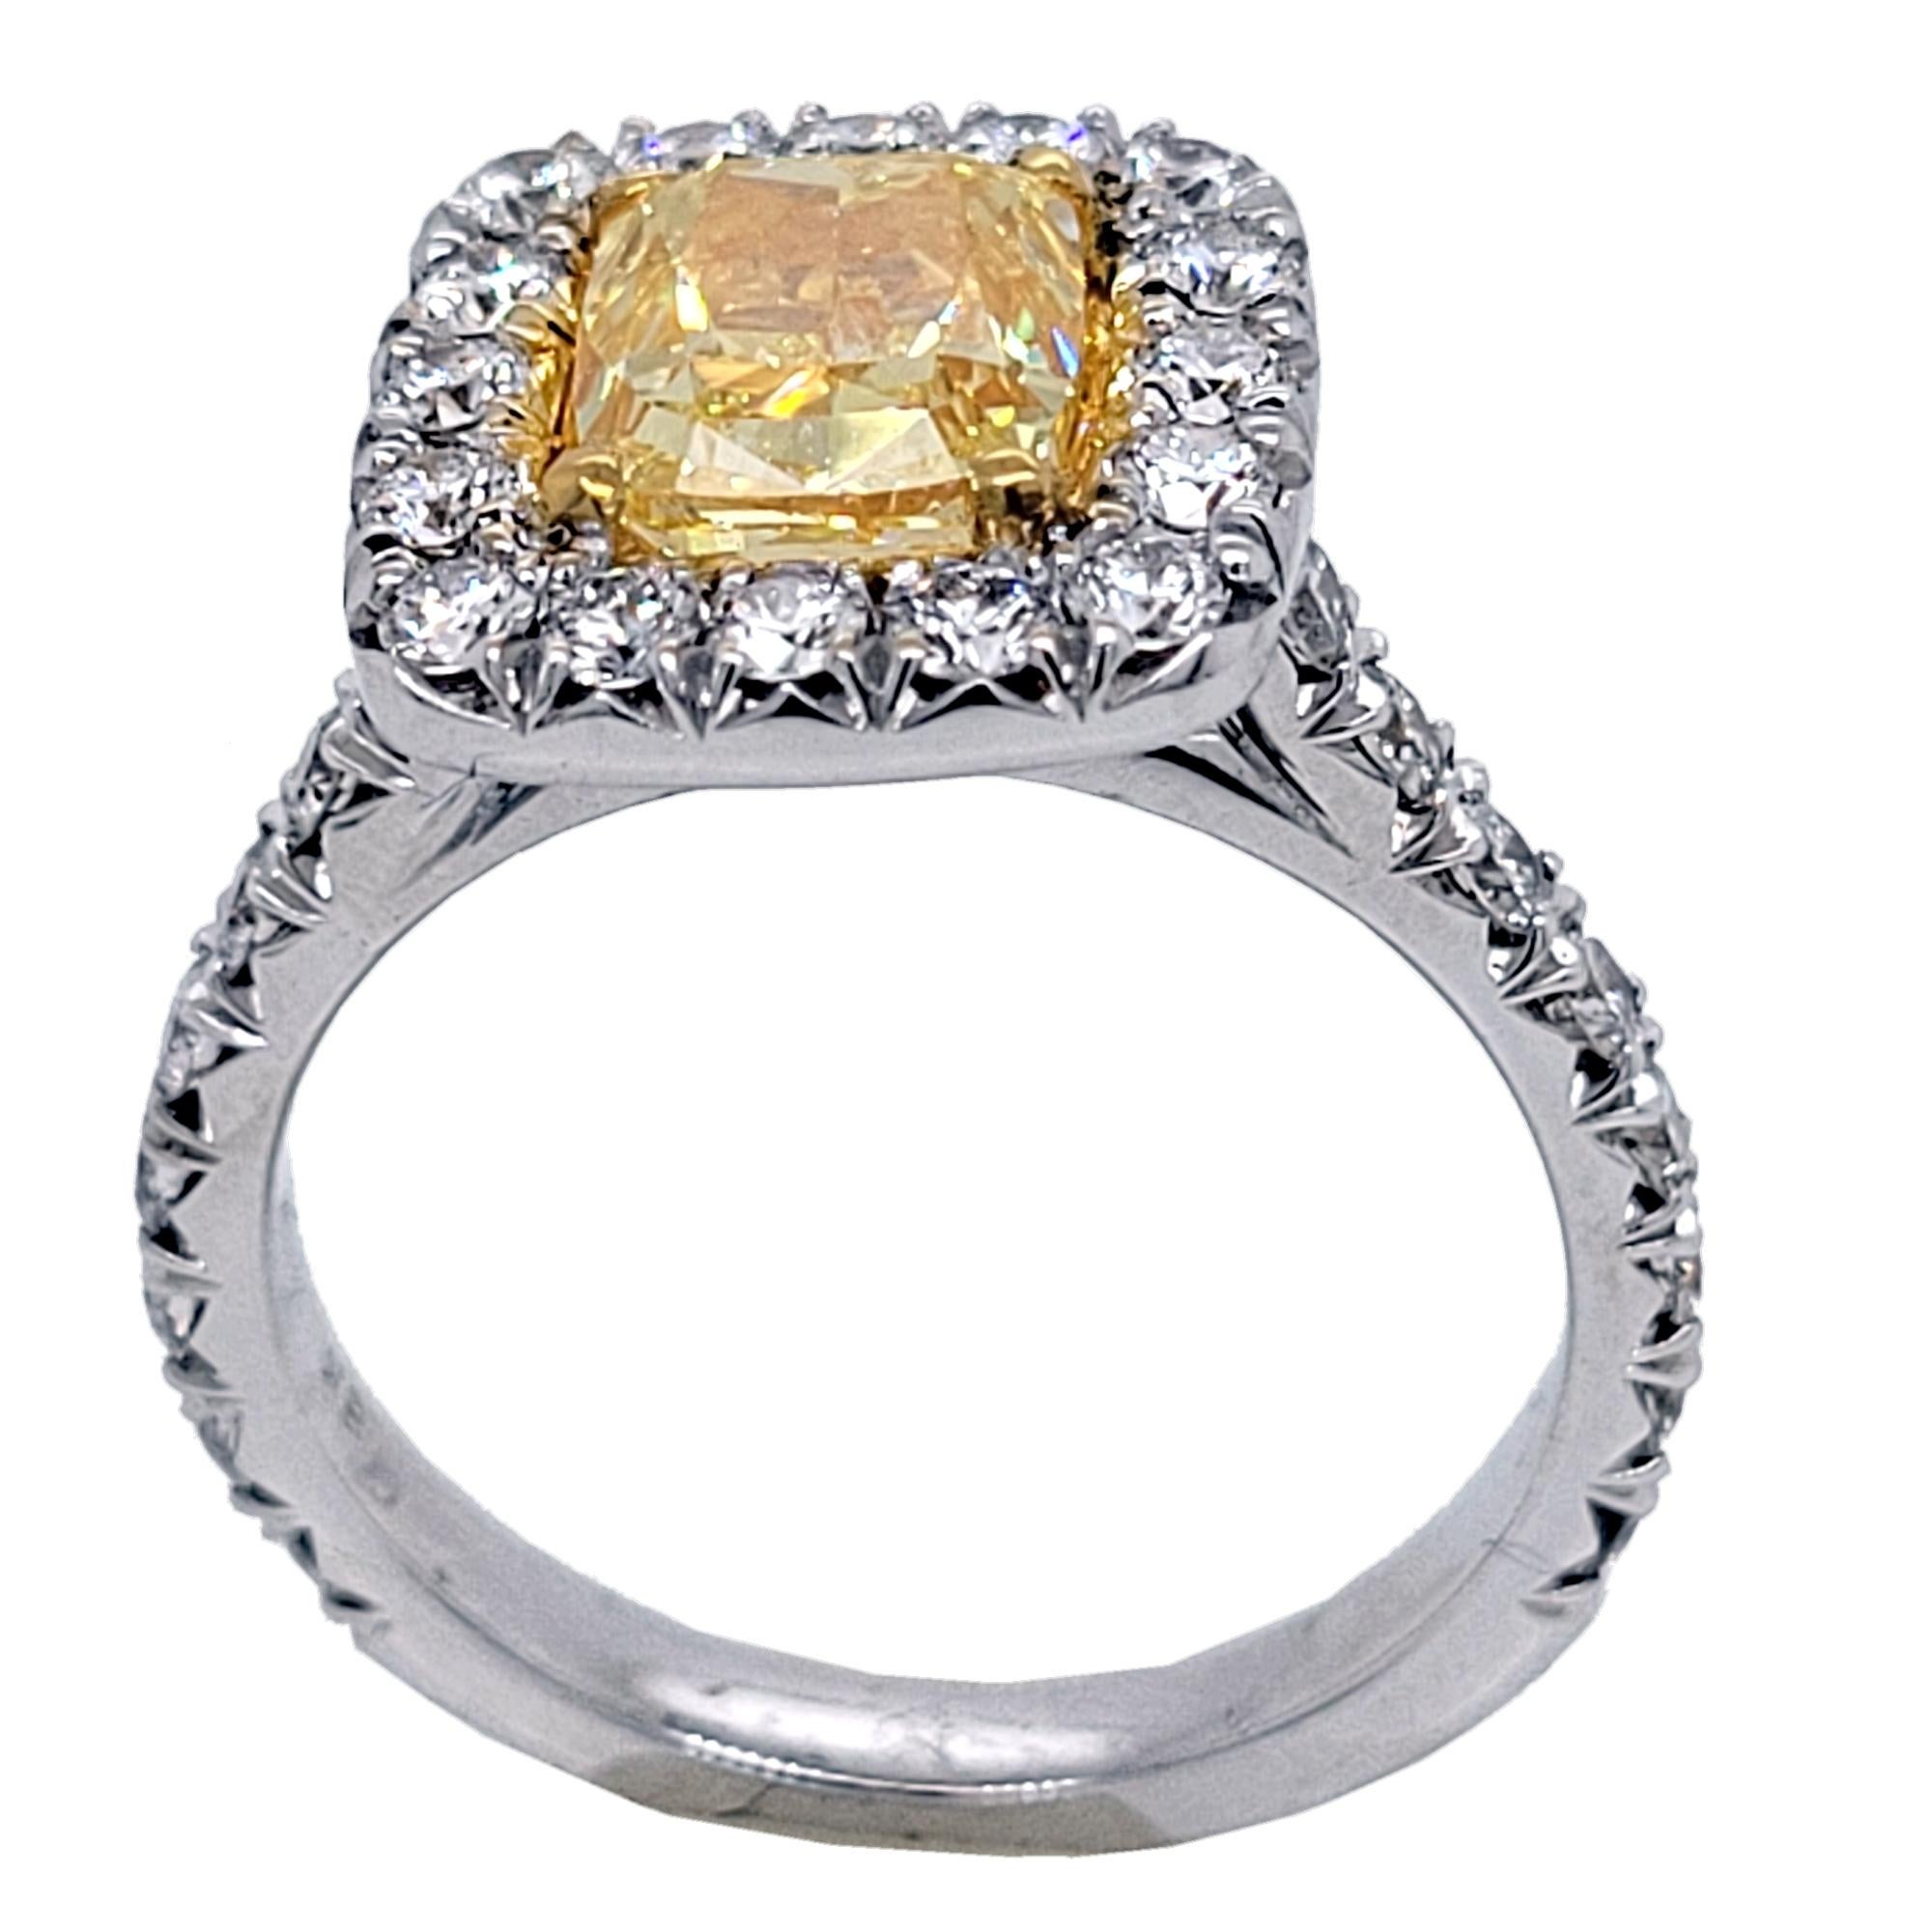 A very fine GIA Certified 1.81 Ct Cushion Cut Natural Fancy Intense Yellow center Diamond set in a fine 18k White Gold French Pave set Engagement Ring with Halo with total weight of 1.01 Ct on the side. #sayitwithyellow 

Diamond specs:
Center